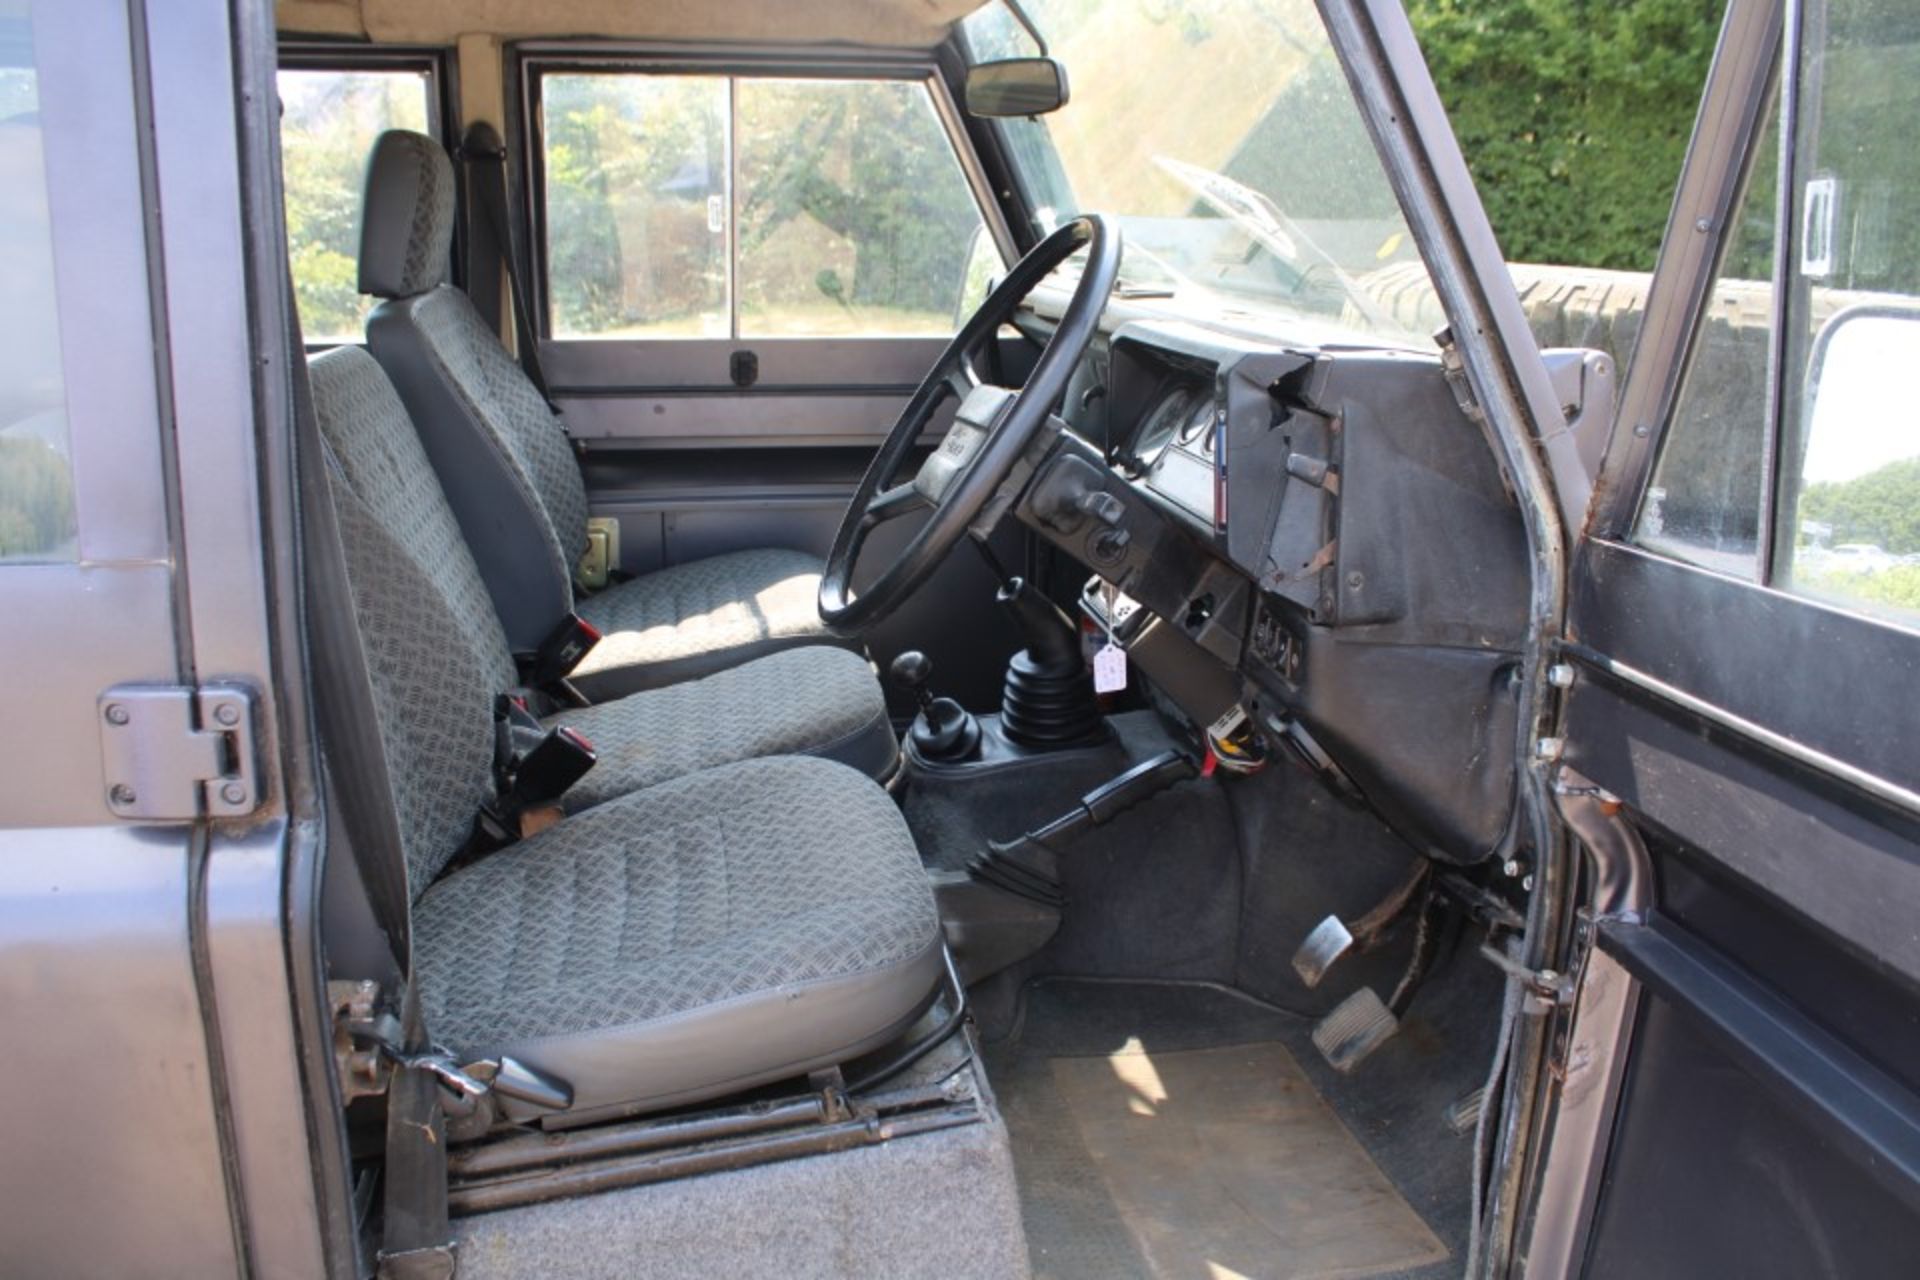 1986 Land Rover 110 Station Wagon - Image 7 of 27